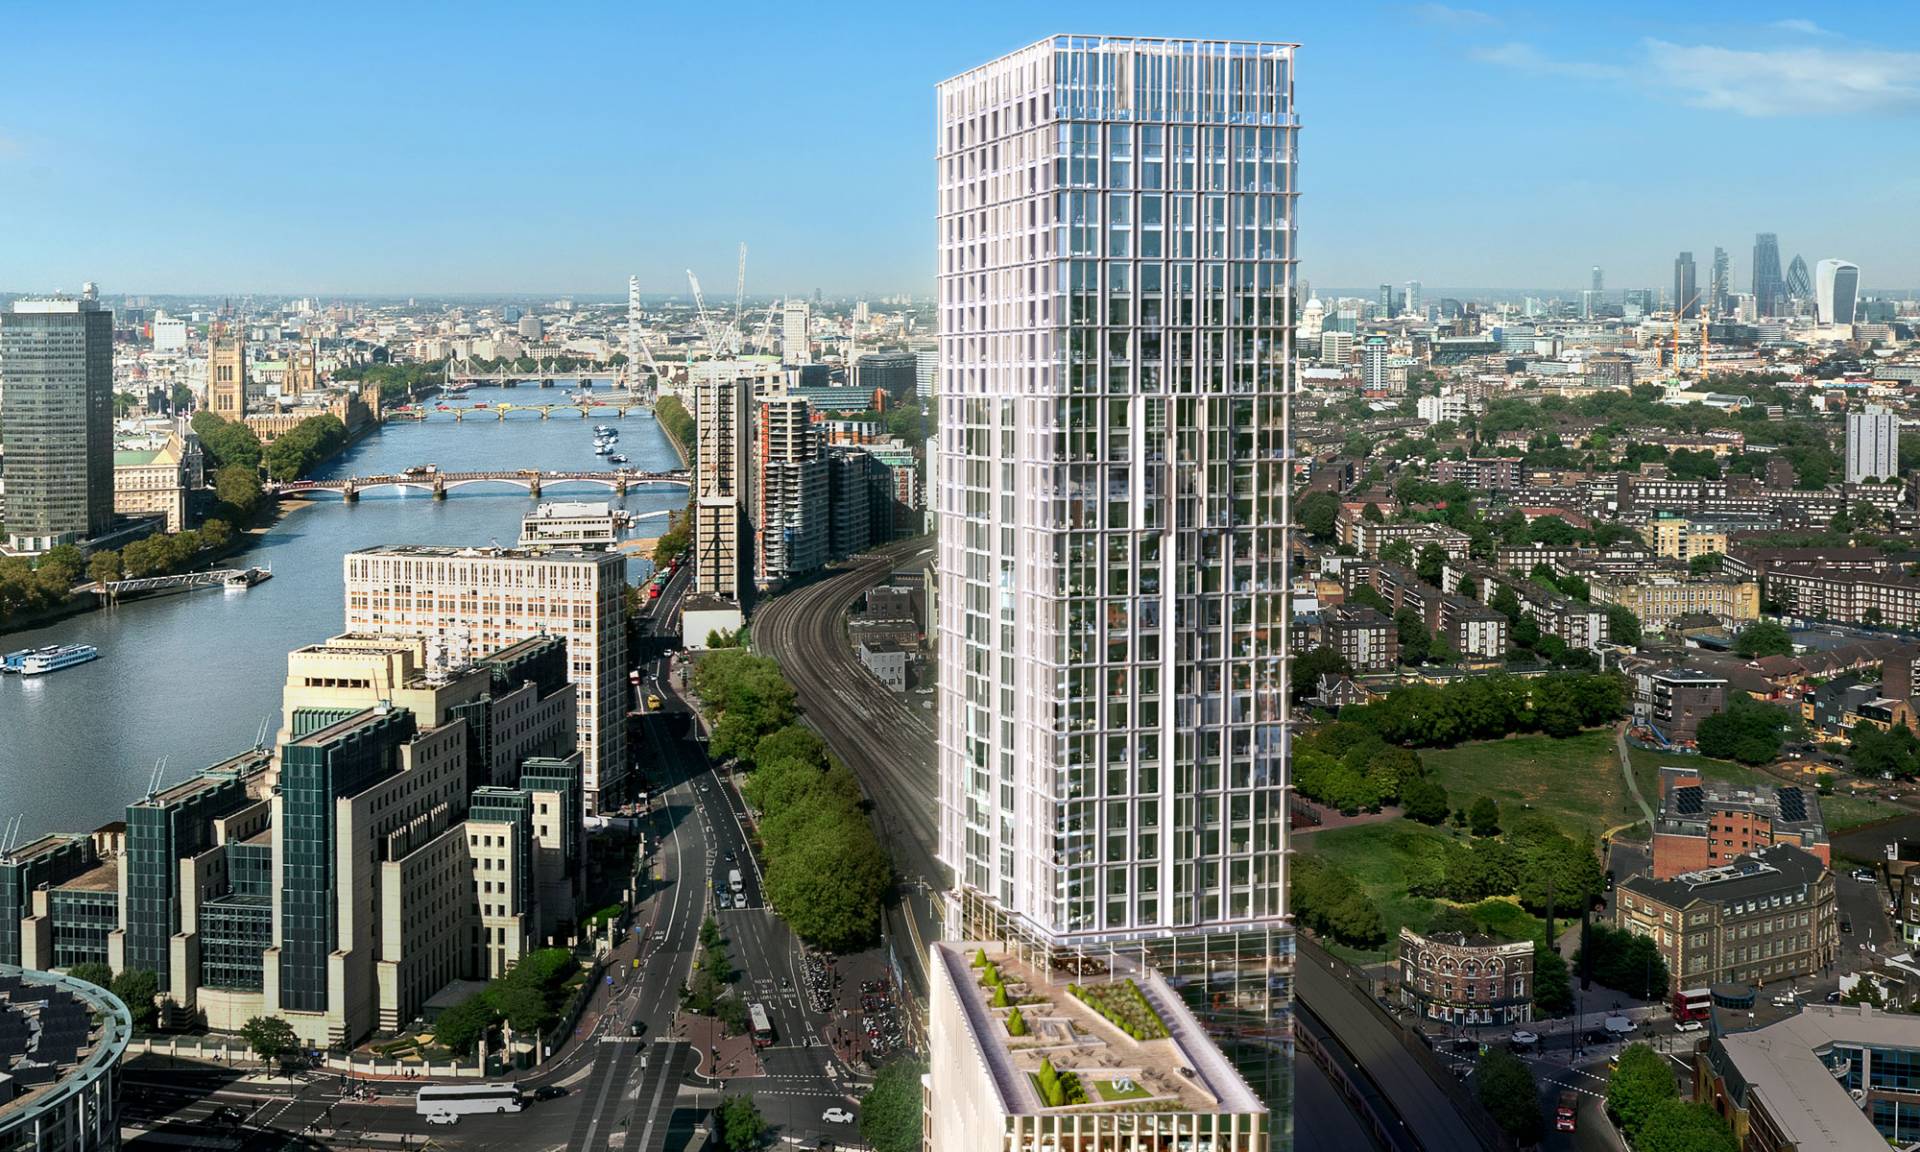 Luxury Living Europe present a luxurious new build property for sale - Pinnacle Penthouse